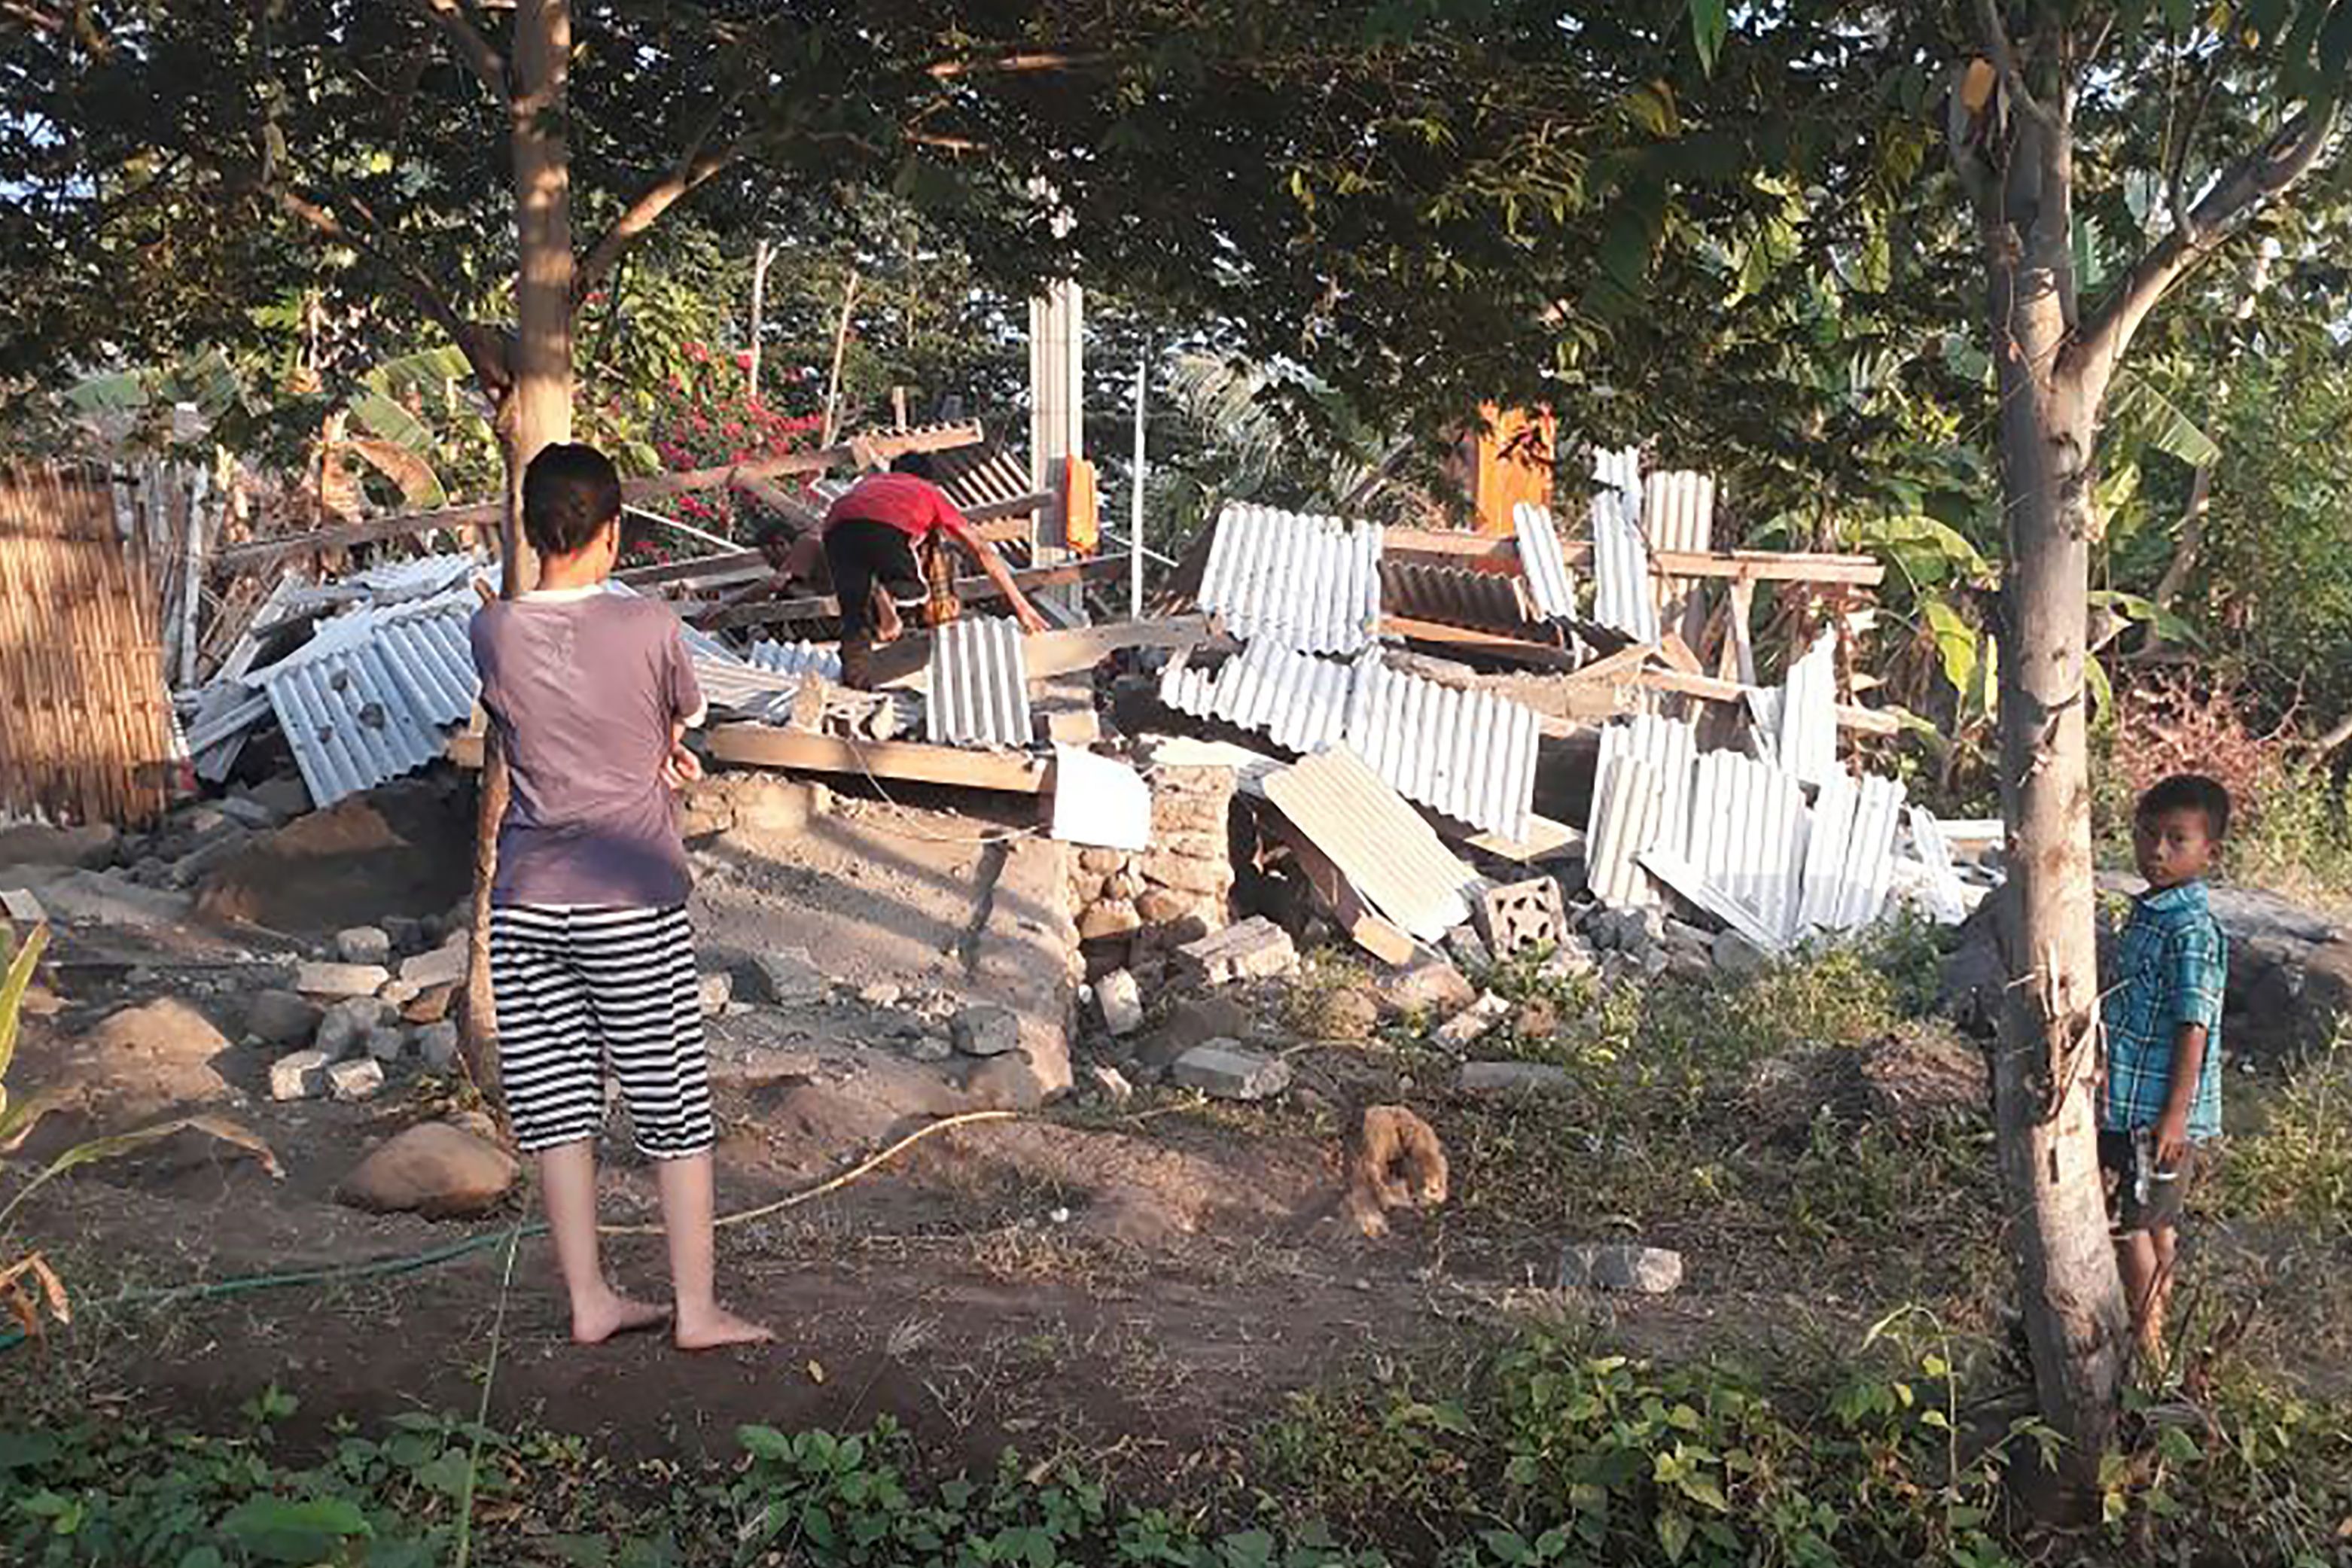 This handout photograph taken on July 29, 2018 and released by the Nusa Tenggara Barat Disaster Mitigation Agency (BPBD) show an Indonesian person (C) scrambling over the collapsed ruins of a house as others look on following an earthquake in Lombok.
A shallow 6.4-magnitude quake struck the Indonesian island of Lombok on July 29, the United States Geological Survey said. / AFP PHOTO / Nusa Tenggara Barat Disaster Mitigation Agency / Handout / RESTRICTED TO EDITORIAL USE - MANDATORY CREDIT "AFP PHOTO / Nusa Tenggara Barat Disaster Mitigation Agency" - NO MARKETING NO ADVERTISING CAMPAIGNS - DISTRIBUTED AS A SERVICE TO CLIENTS